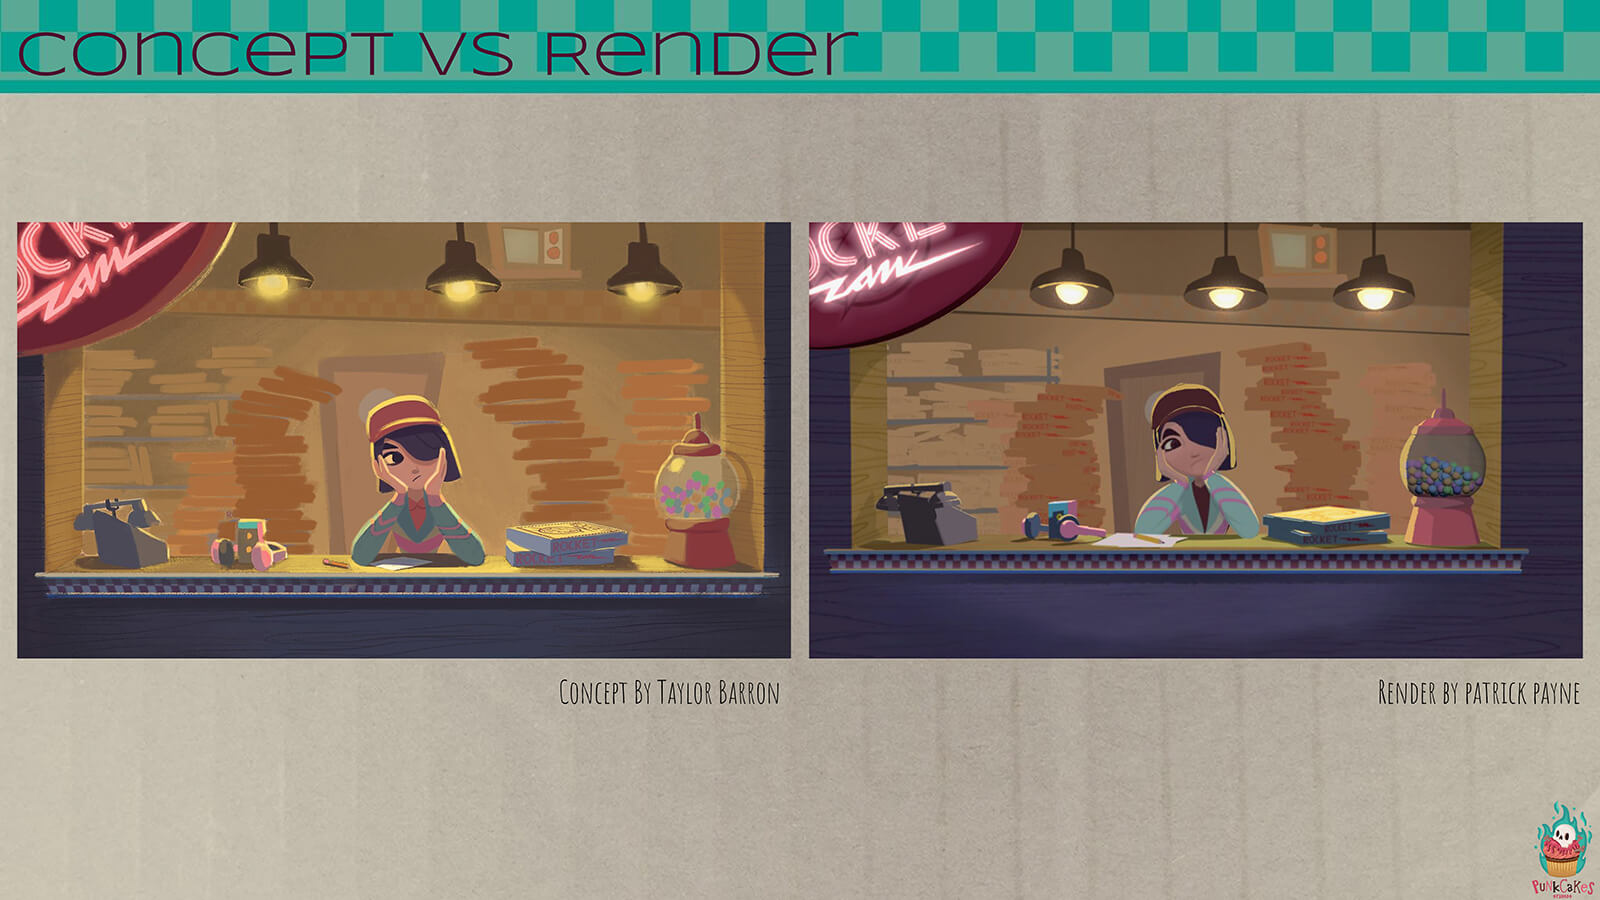 A "concept vs render" sheet, showing a scene from the film's conceptual stage against the final product.